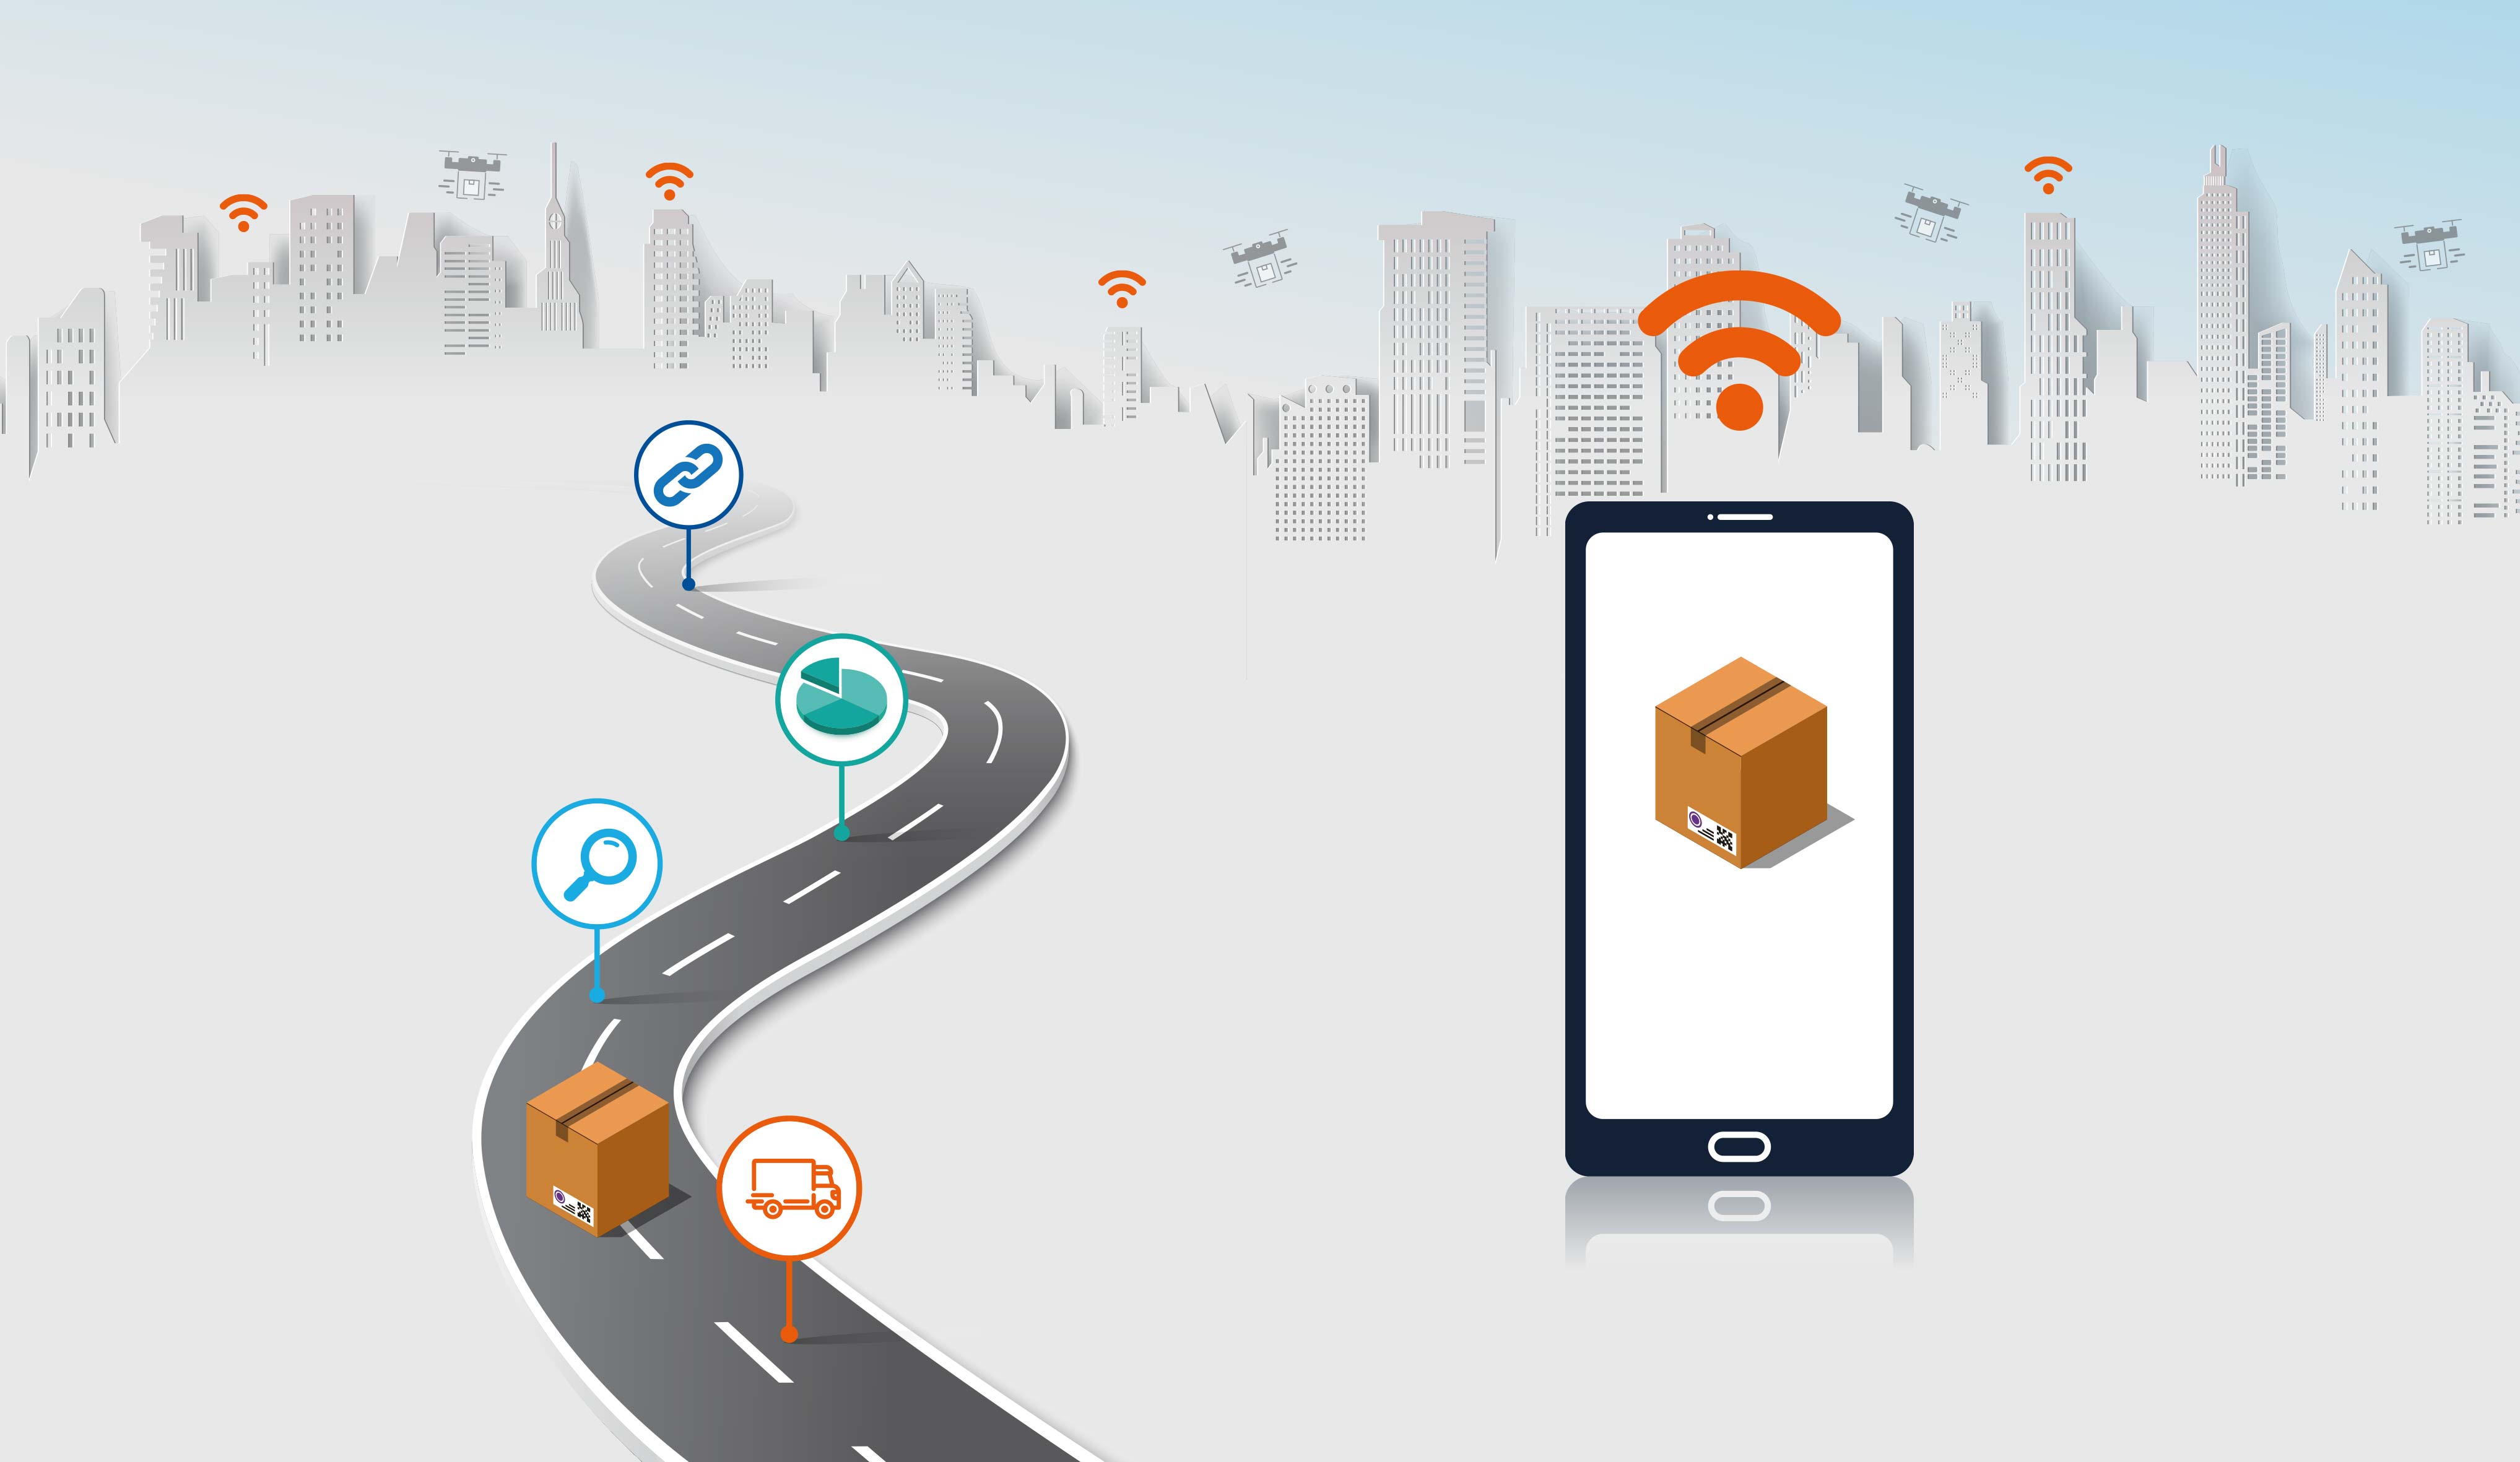 New business models are changing last-mile delivery transportation